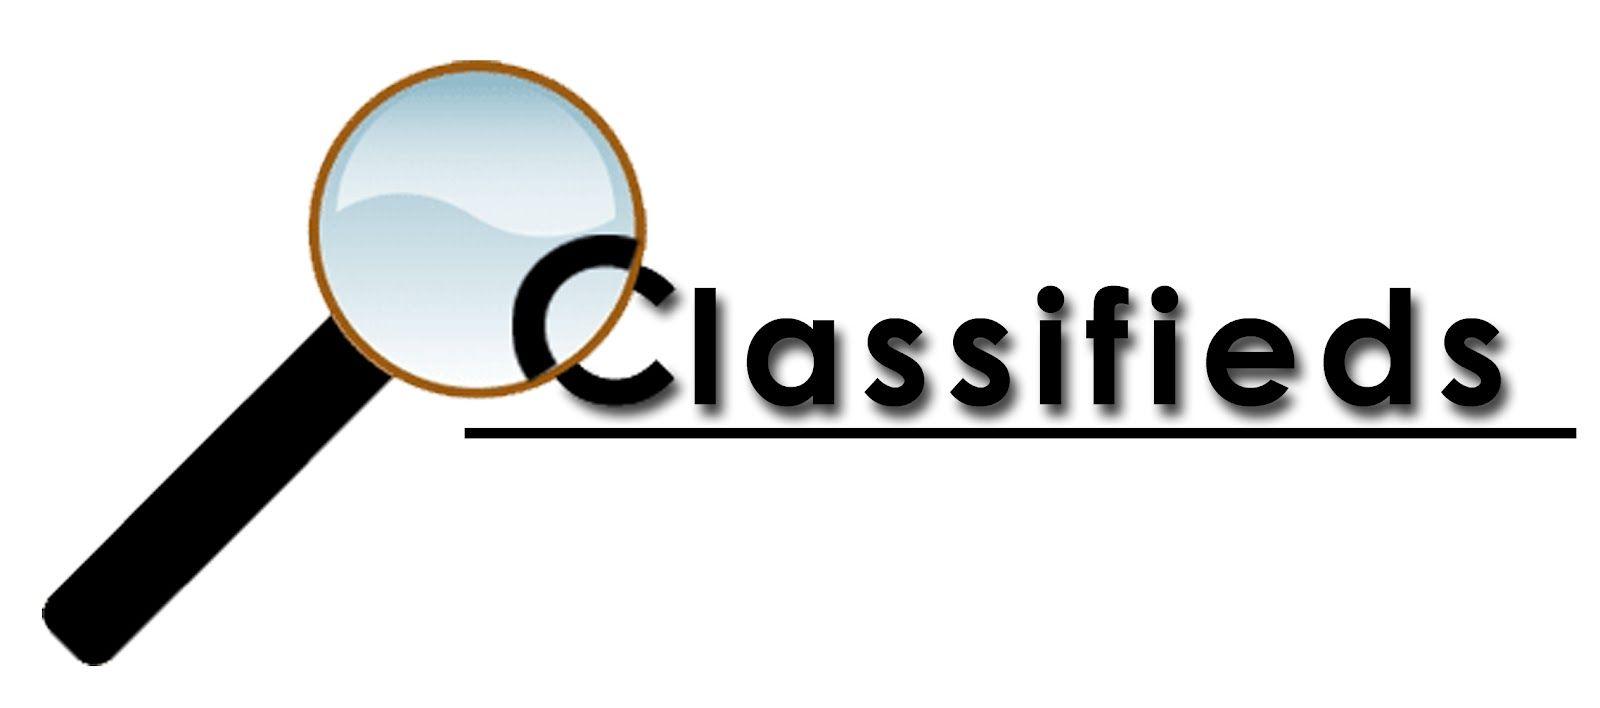 Web Ad Logo - Post 80 Ads To Top Classified USA, UK, CANADA Ad Posting Sites